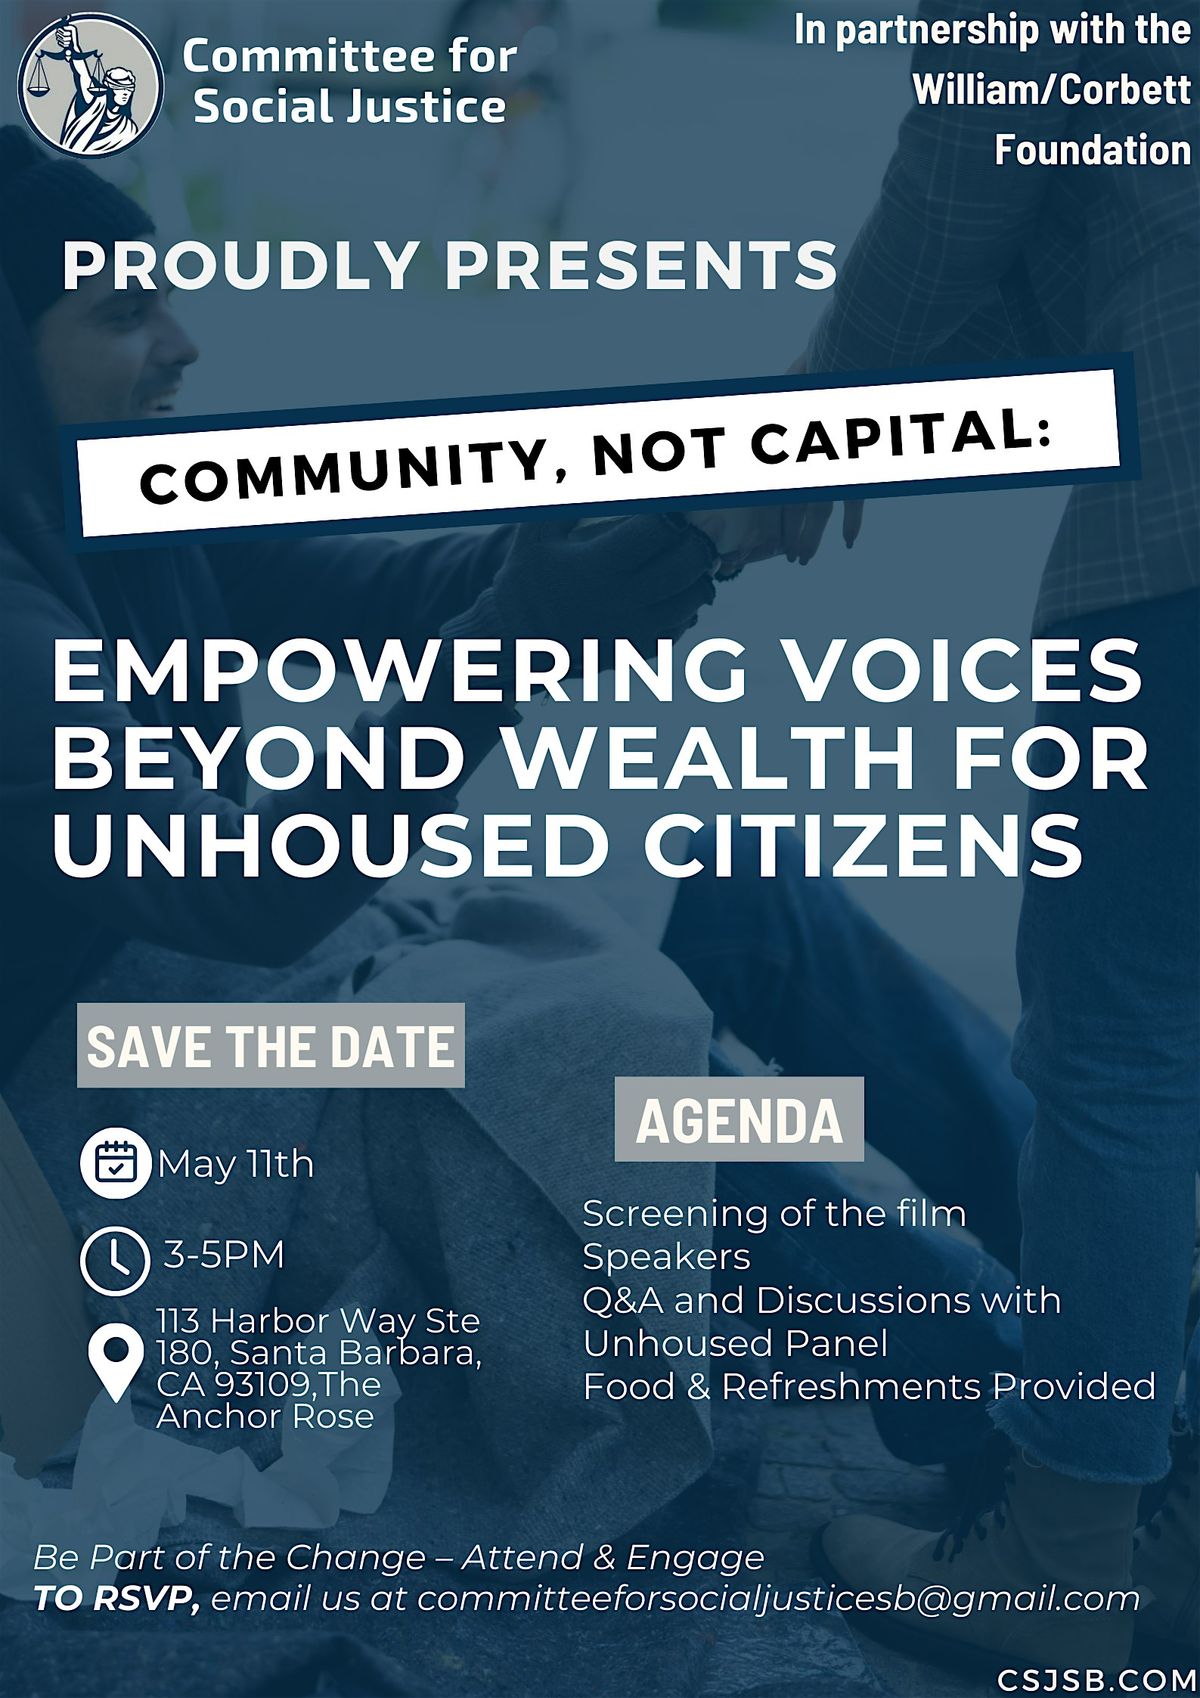 Community,Not Capital:Empowering Voices Beyond Wealth for Unhoused Citizens